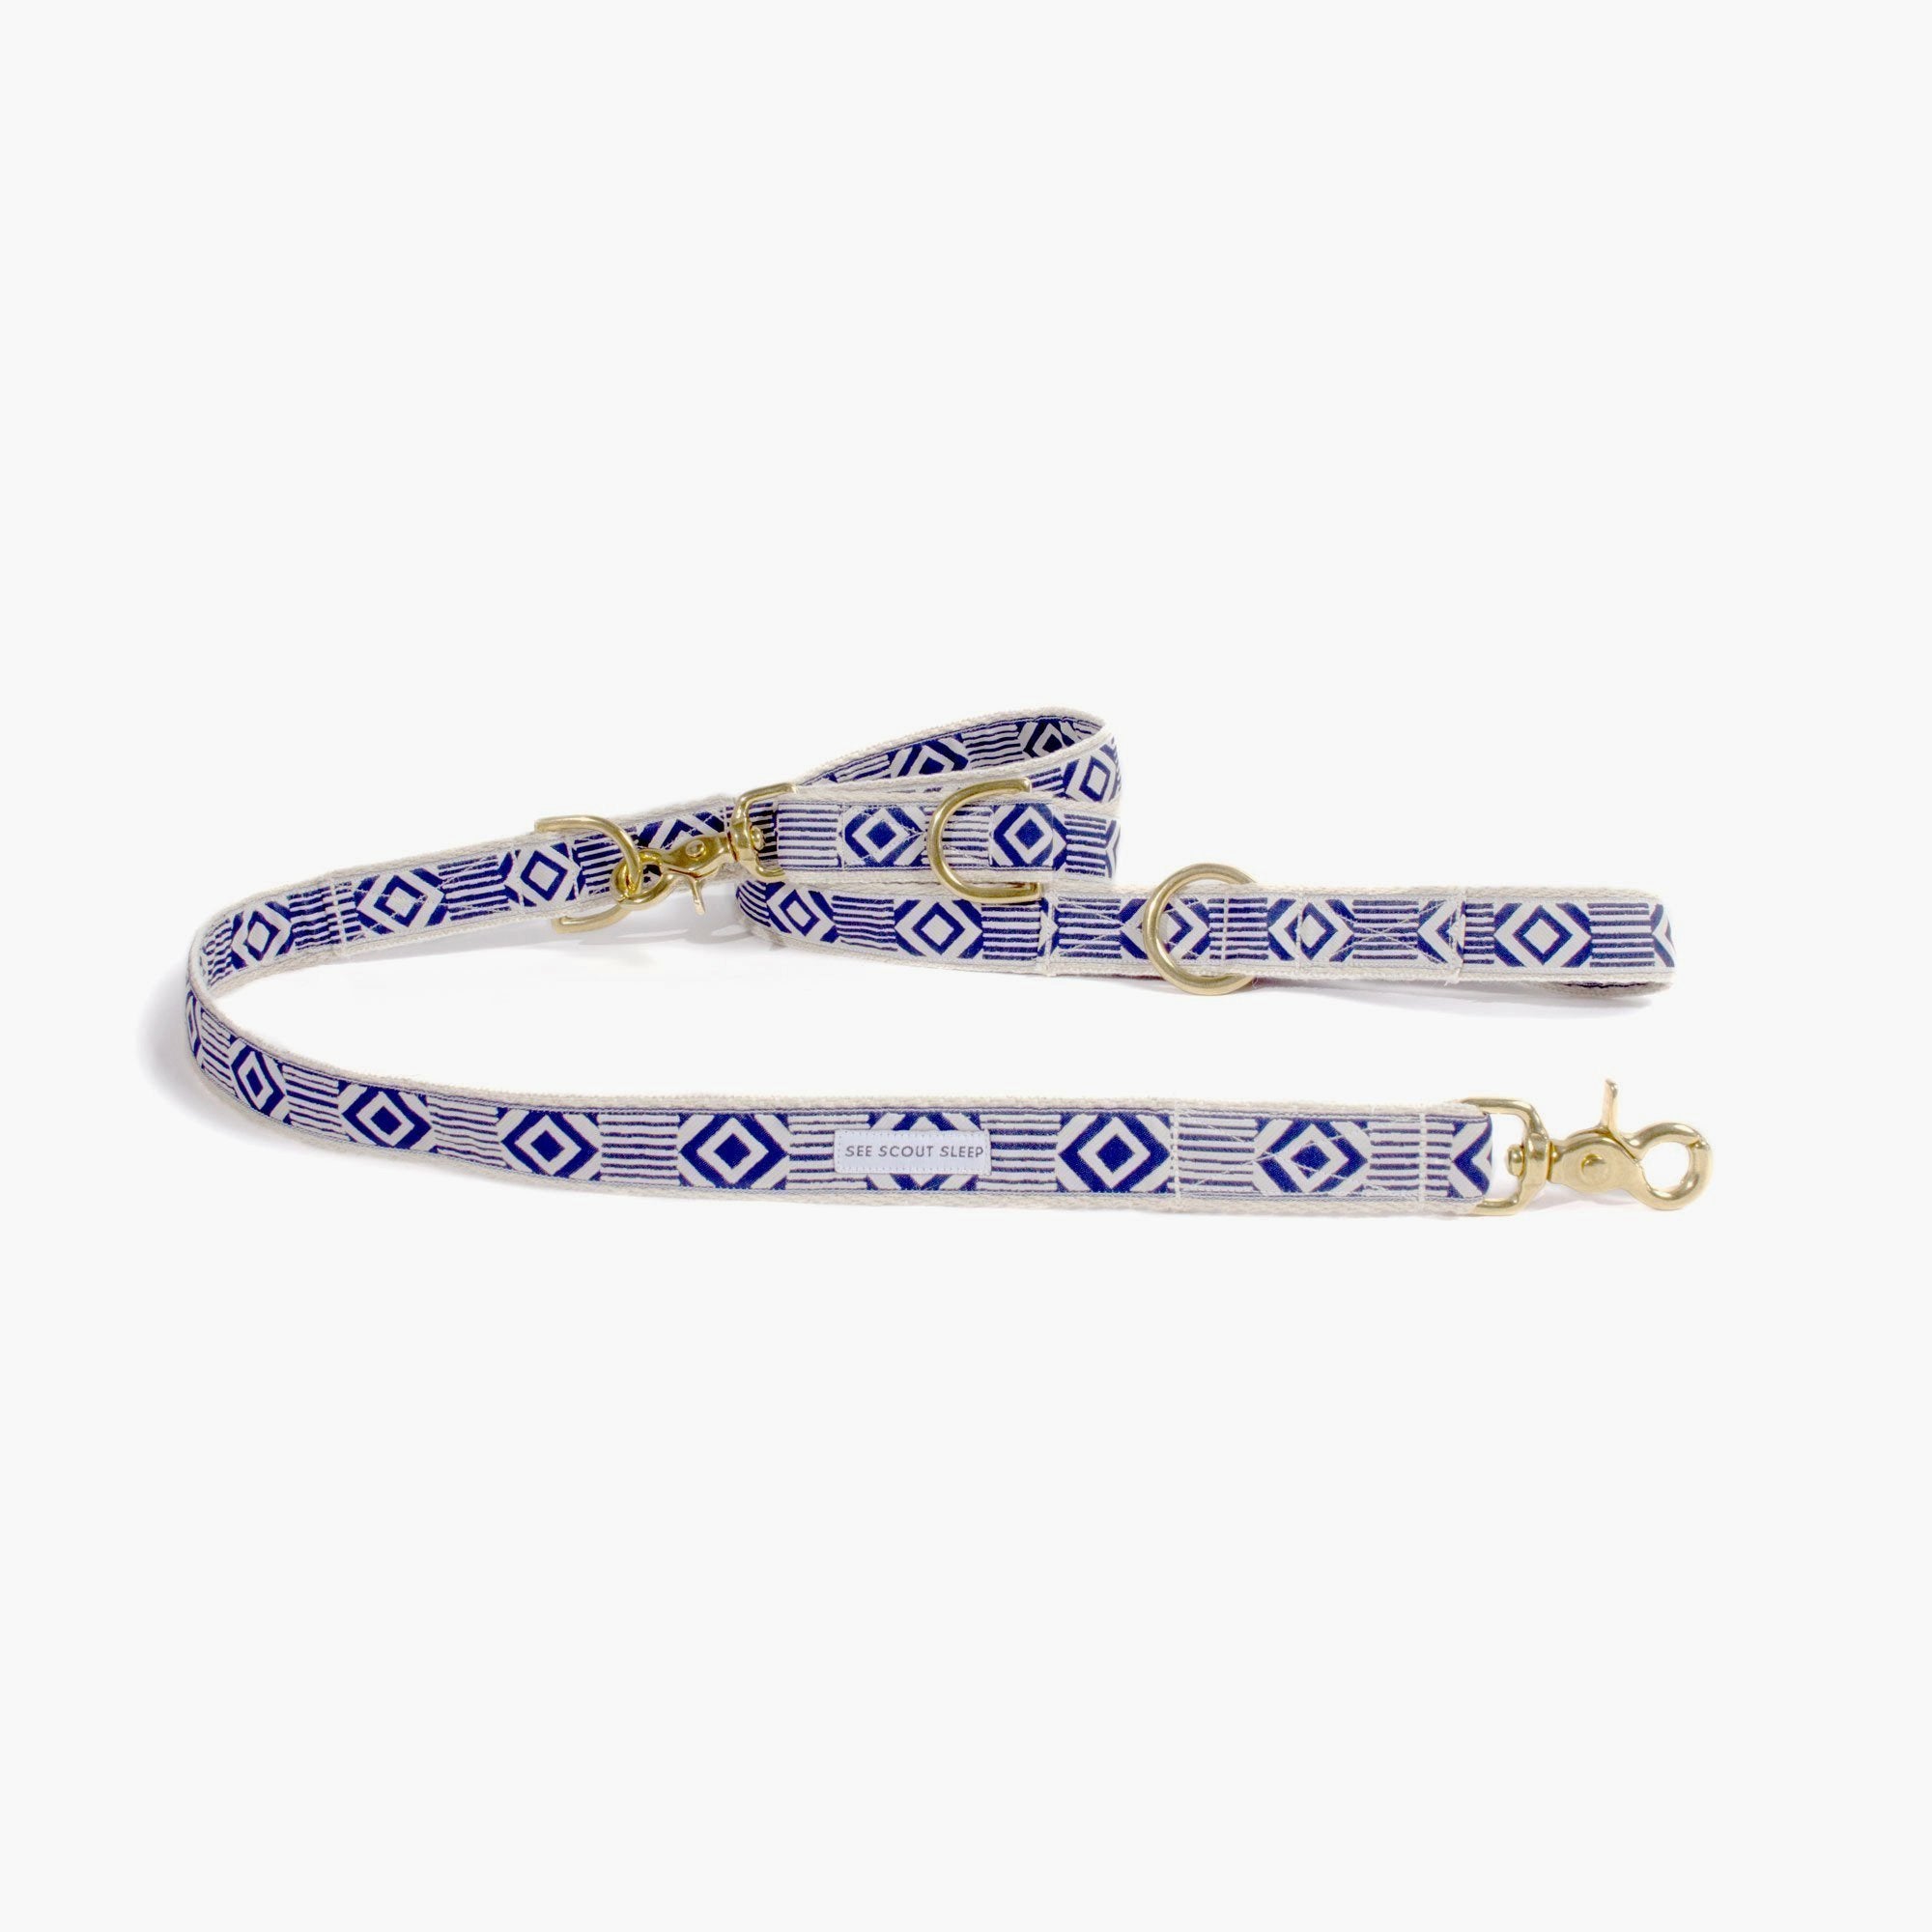 Out Of My Box City Leash - Navy & Cream - NEW PETS ON THE BLOCK.COM